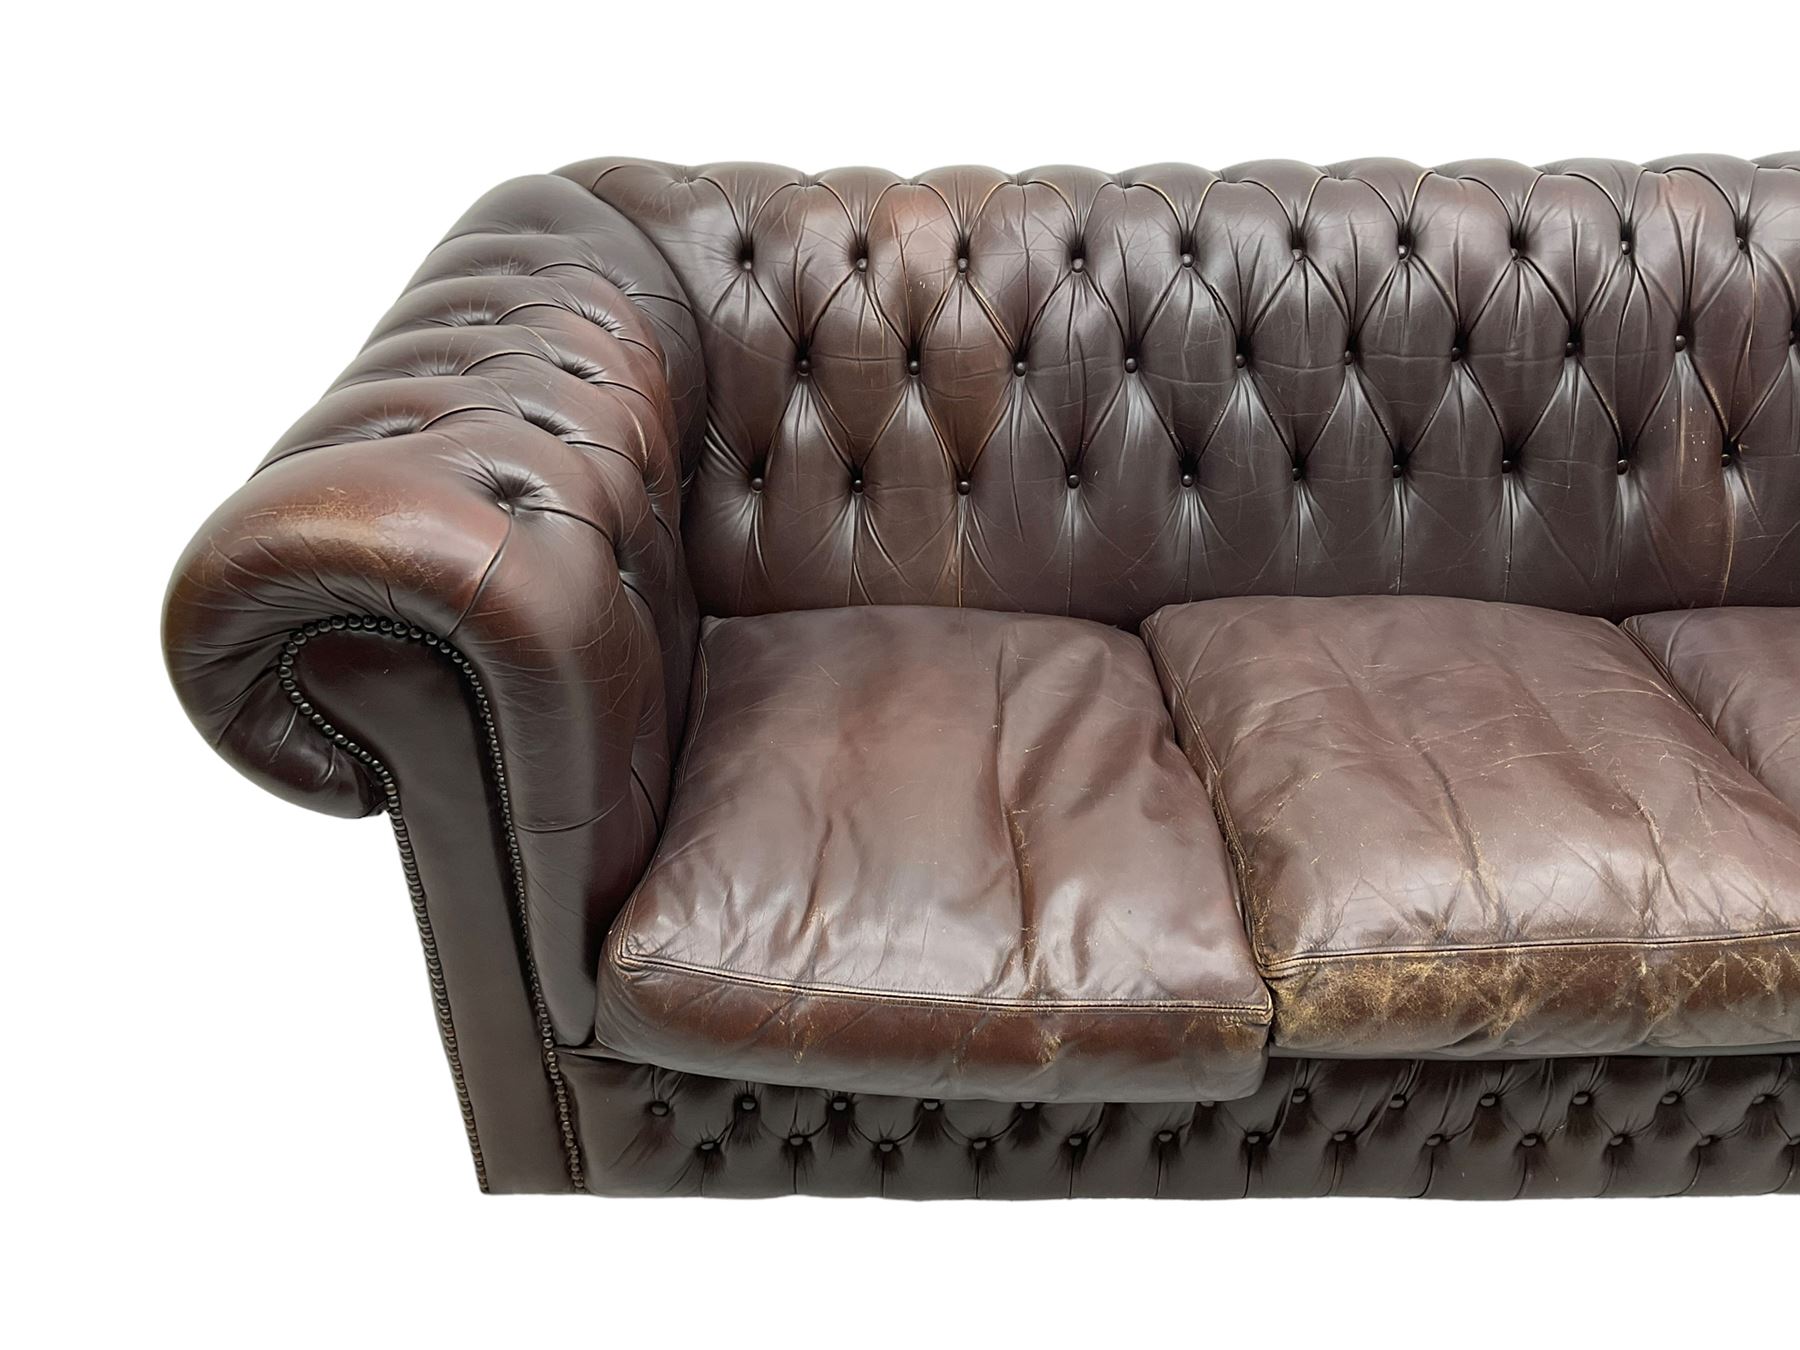 Three-seat Chesterfield sofa - Image 2 of 5